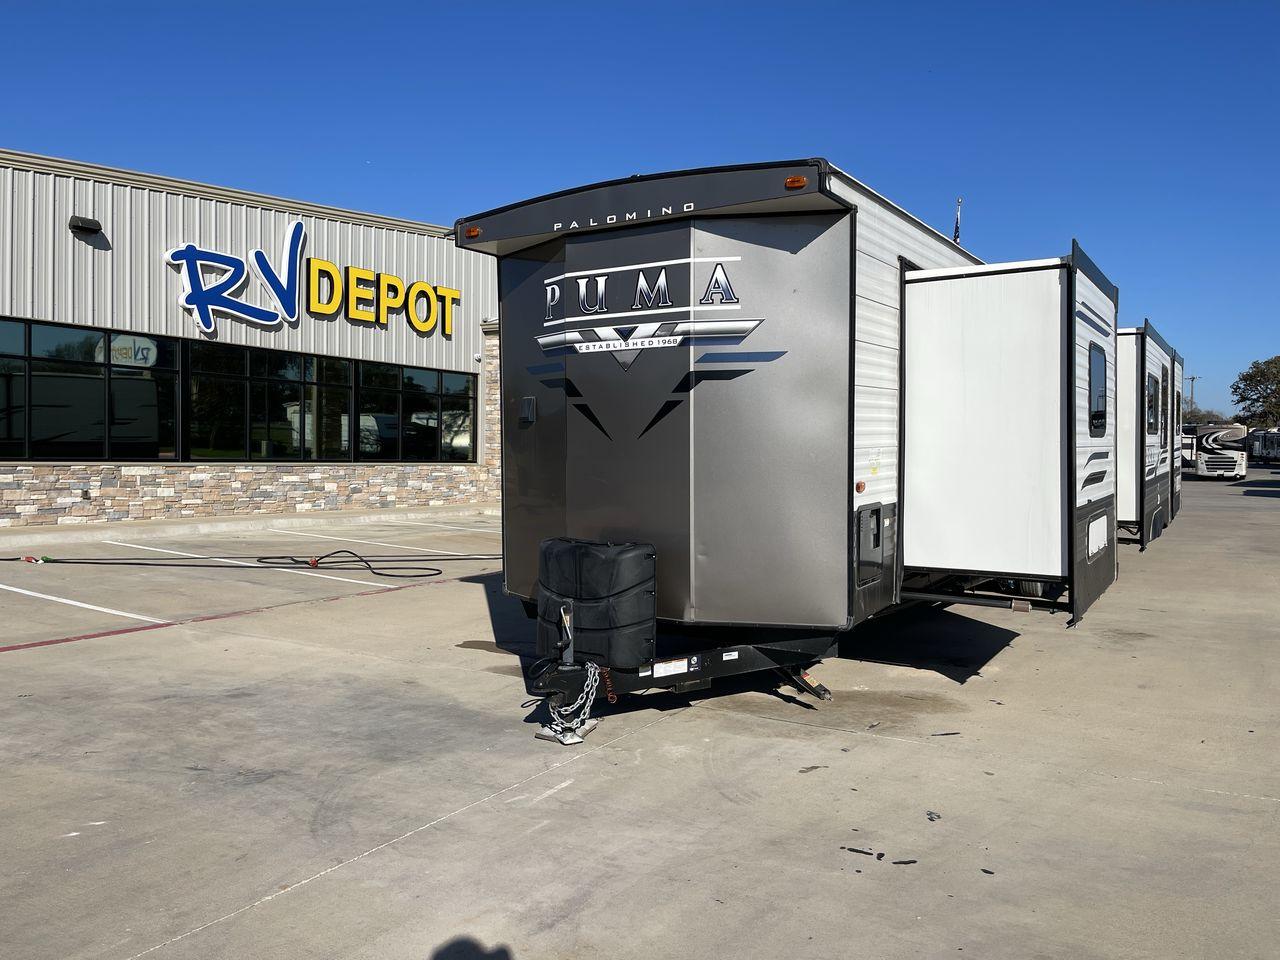 2022 WHITE PUMA 39DBT (4X4TPUR29NP) , Length: 42.33 ft. | Dry Weight: 10,162 lbs. | Gross Weight: 12,000 lbs. | Slides: 3 transmission, located at 4319 N Main St, Cleburne, TX, 76033, (817) 678-5133, 32.385960, -97.391212 - Are you in the market for a spacious and luxurious travel trailer bunk house? Look no further than RV Depot in Cleburne, TX, where we have a stunning 2022 PUMA 39DBT available for sale. With its impressive features and unbeatable price of $47,995, this travel trailer is sure to exceed your expectati - Photo #0